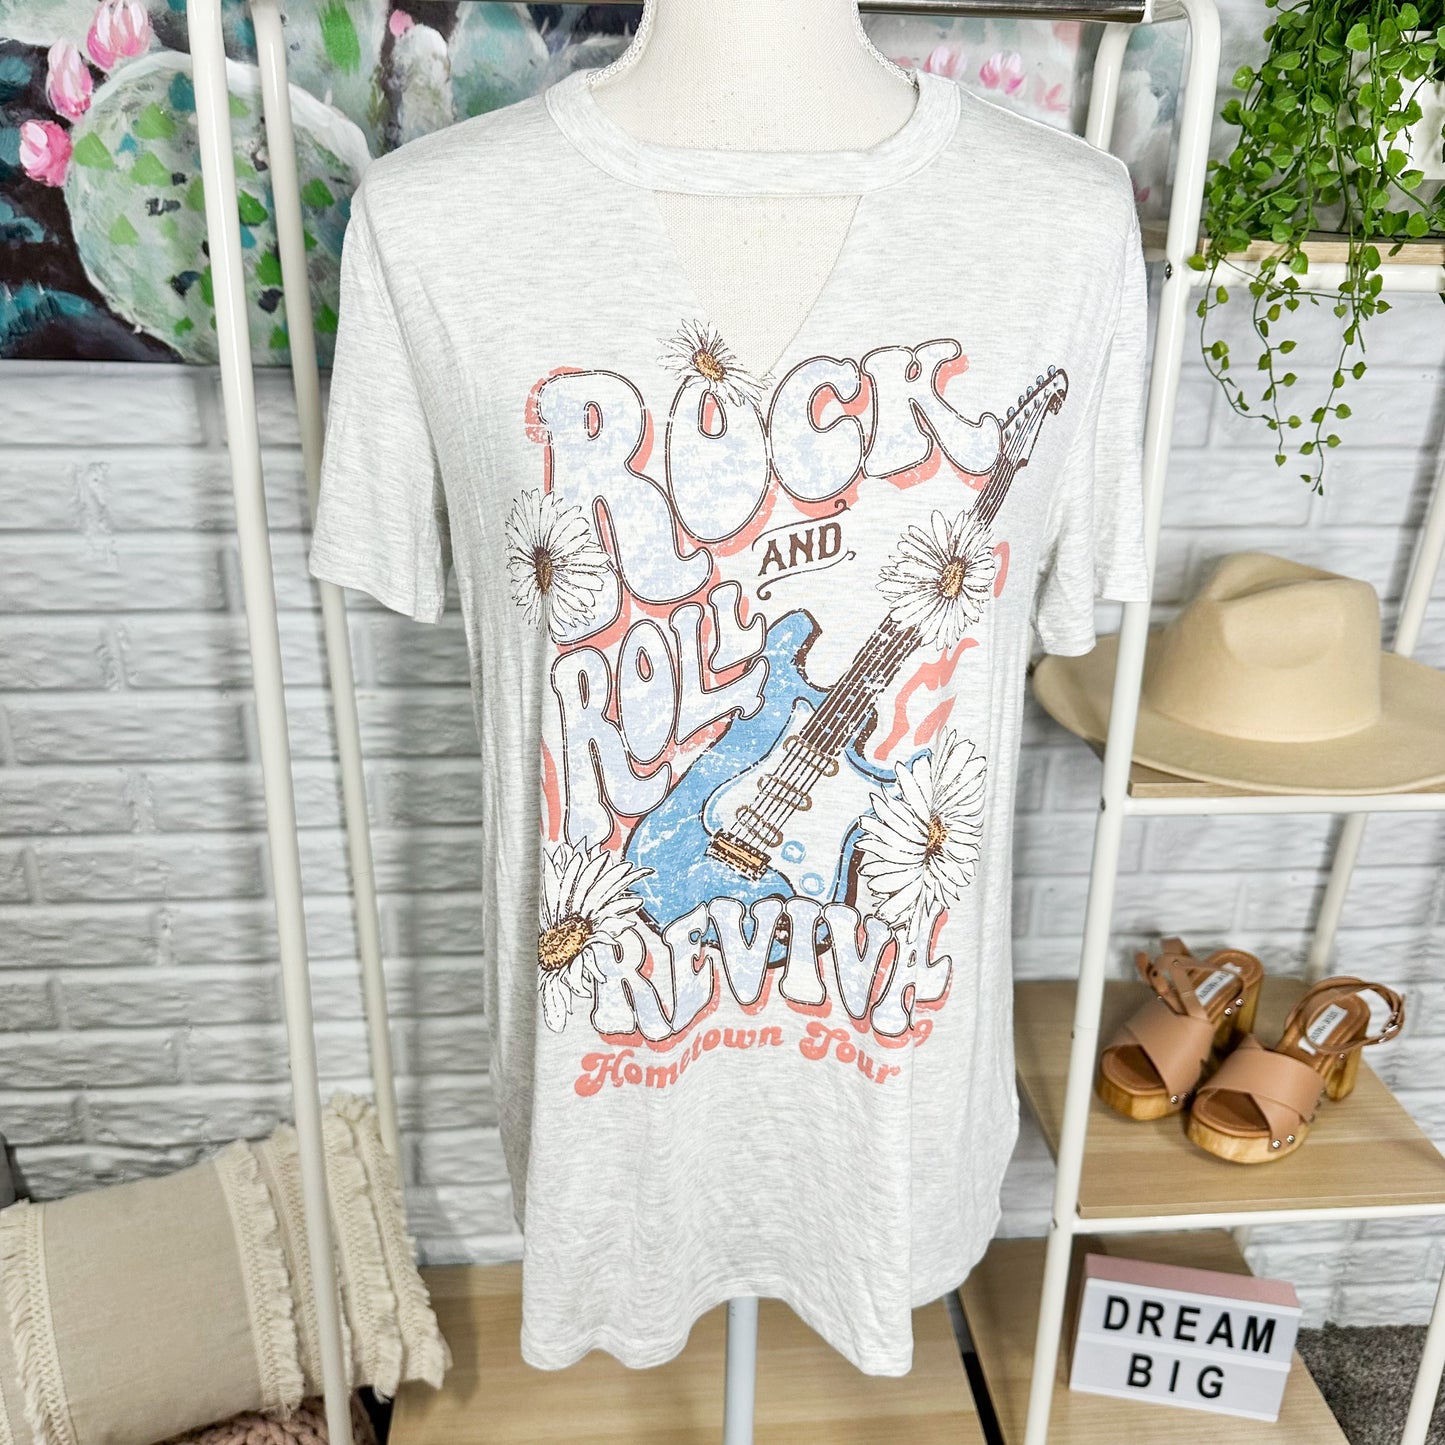 Maurice’s New Rock & Roll Revival Graphic Tee Size XS